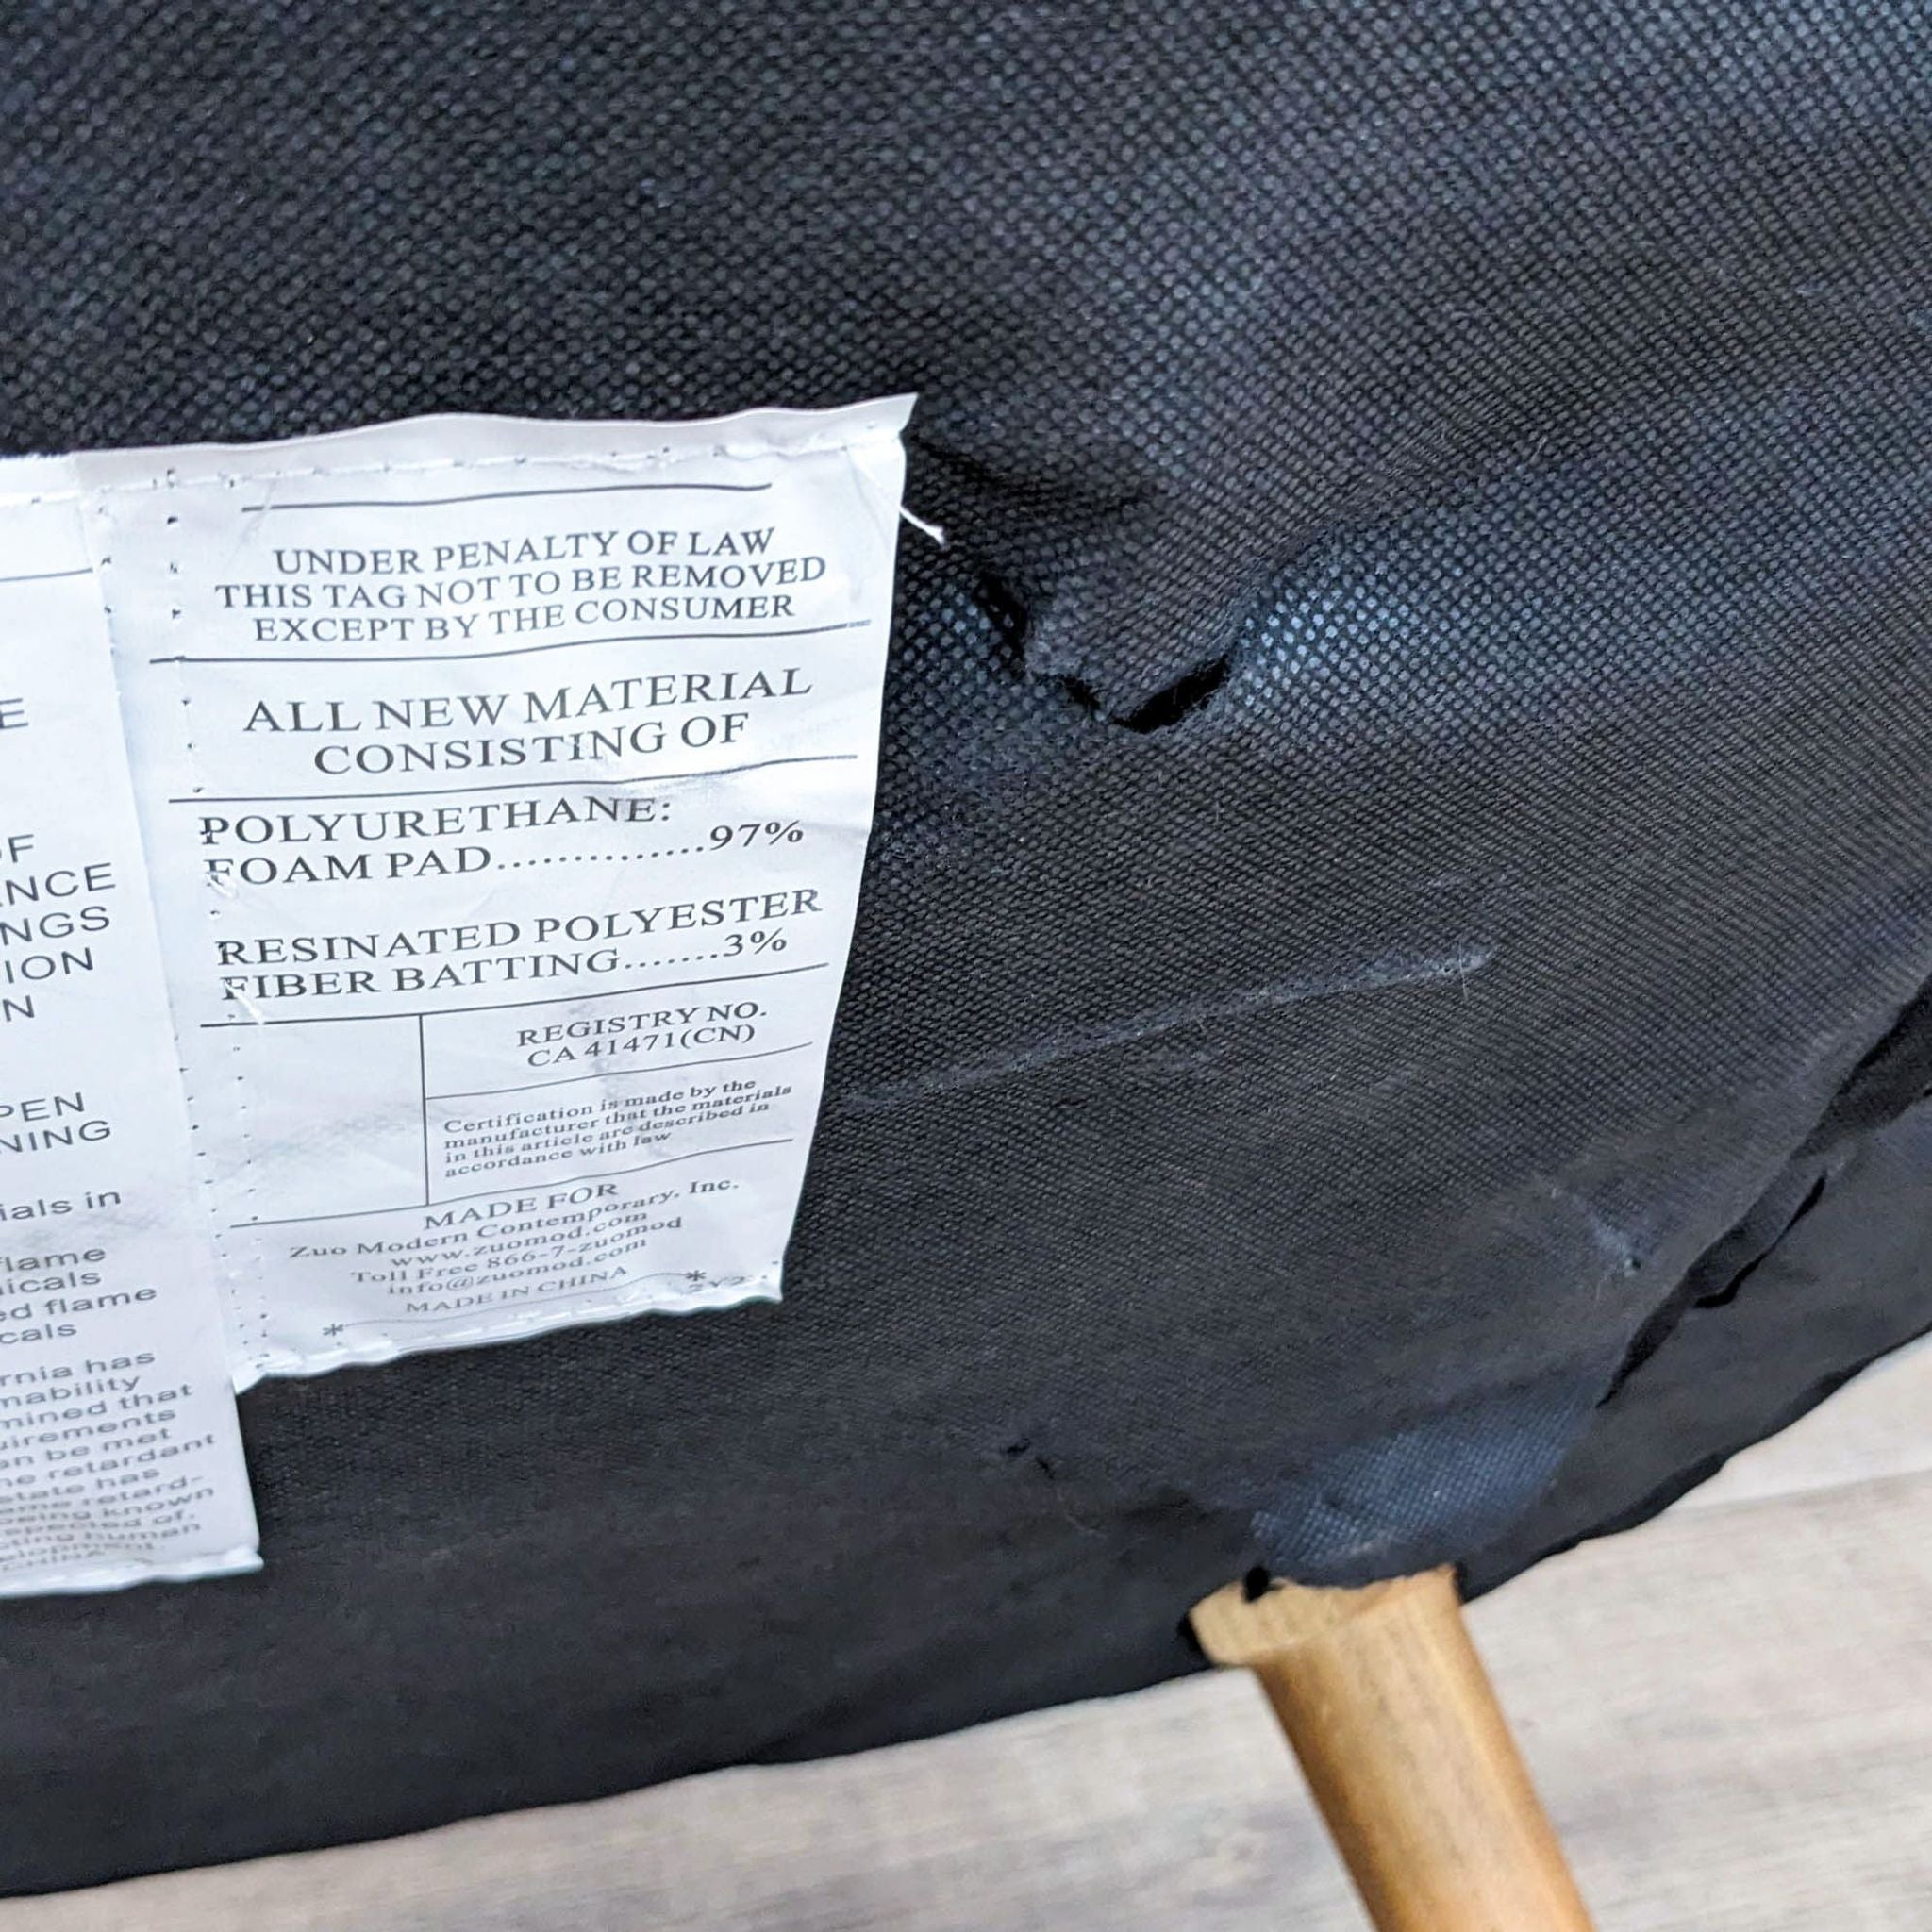 Alt text: Close-up of a Zuo Modern lounge item's law label on black fabric with a visible tear, showing material composition details.